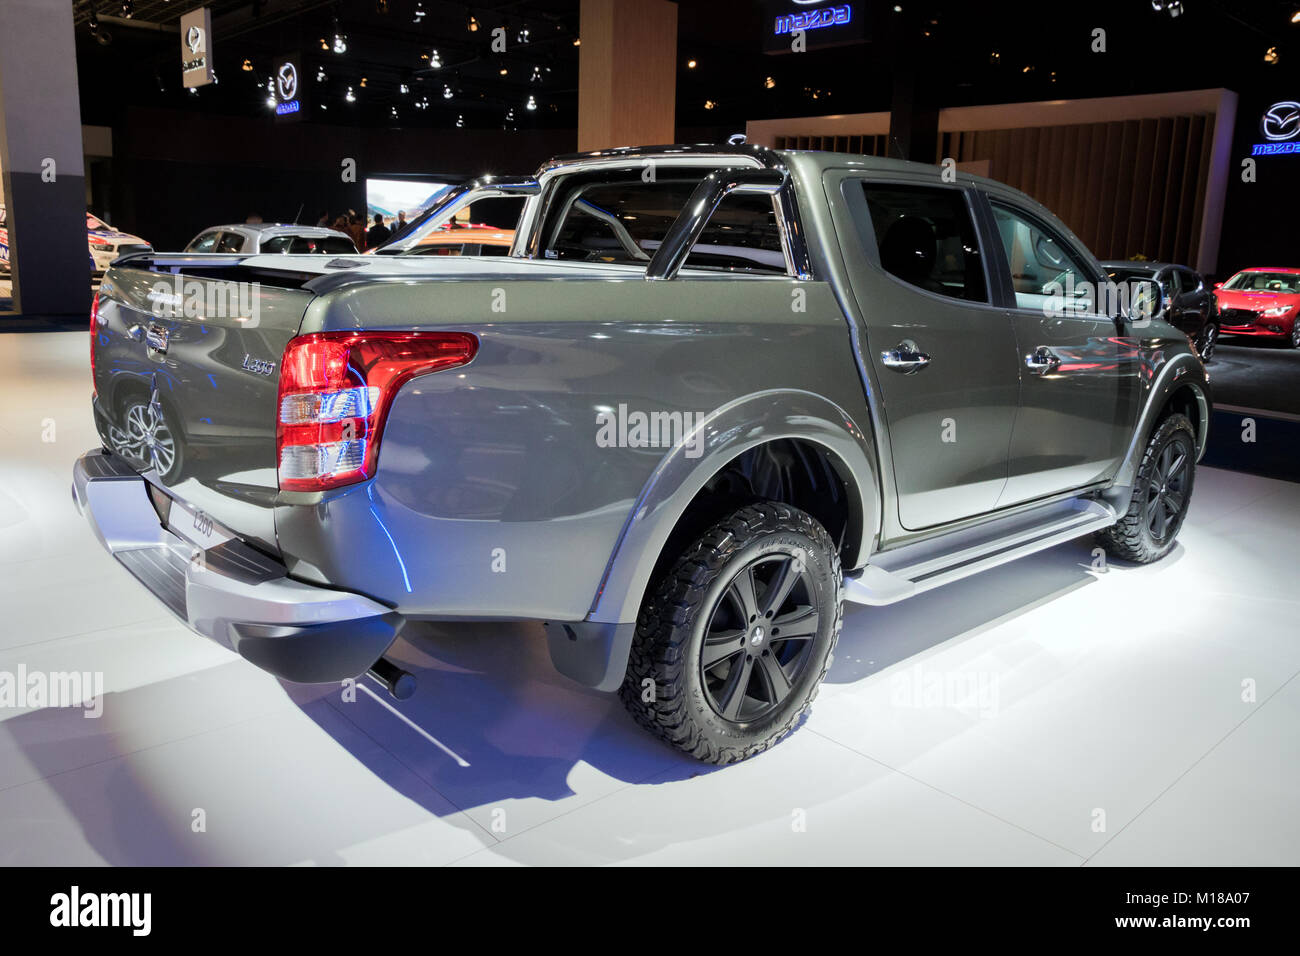 BRUSSELS - JAN 10, 2018: New Mitsubishi L200 Triton pickup truck shown at the Brussels Motor Show. Stock Photo